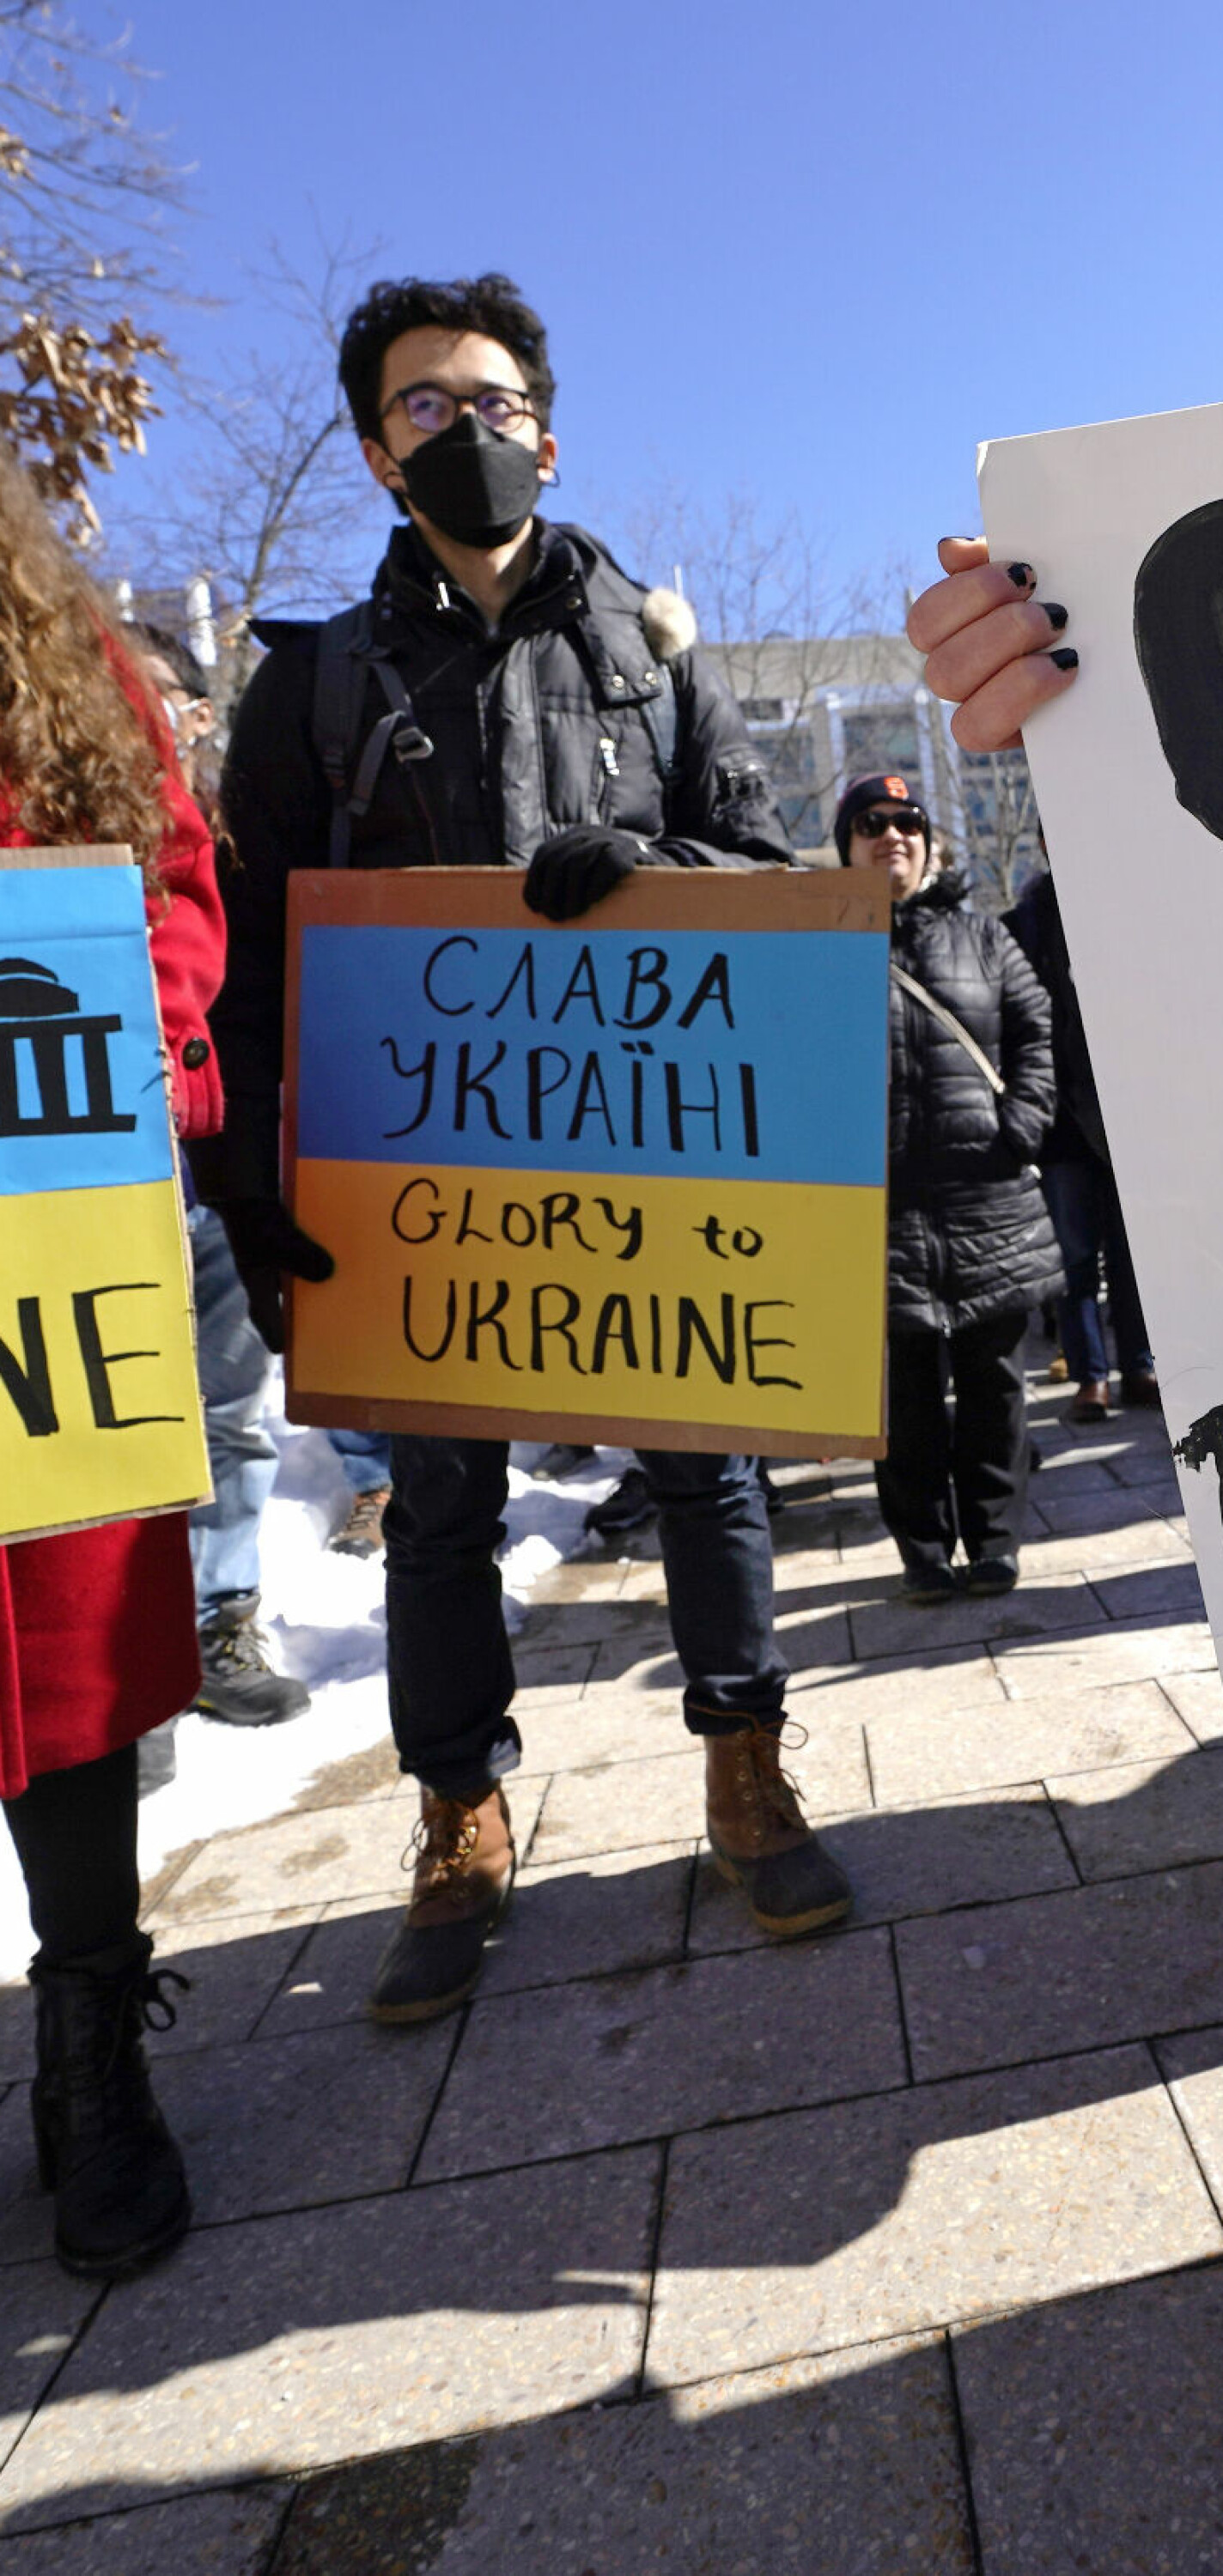 Demonstrators clutch placards during a rally in support of Ukraine, during a protest on Monday, Feb. 28, 2022, at the Massachusetts Institute of Technology in Cambridge, Mass. MIT has severed ties with a research university it helped establish in Russia, citing the country's "unacceptable" invasion of Ukraine. The Cambridge university said it notified the Skolkovo Institute of Science and Technology in Moscow on Friday, Feb. 25, 2022, that it was exercising its right to terminate the MIT Skoltech Program. (AP Photo/Charles Krupa)